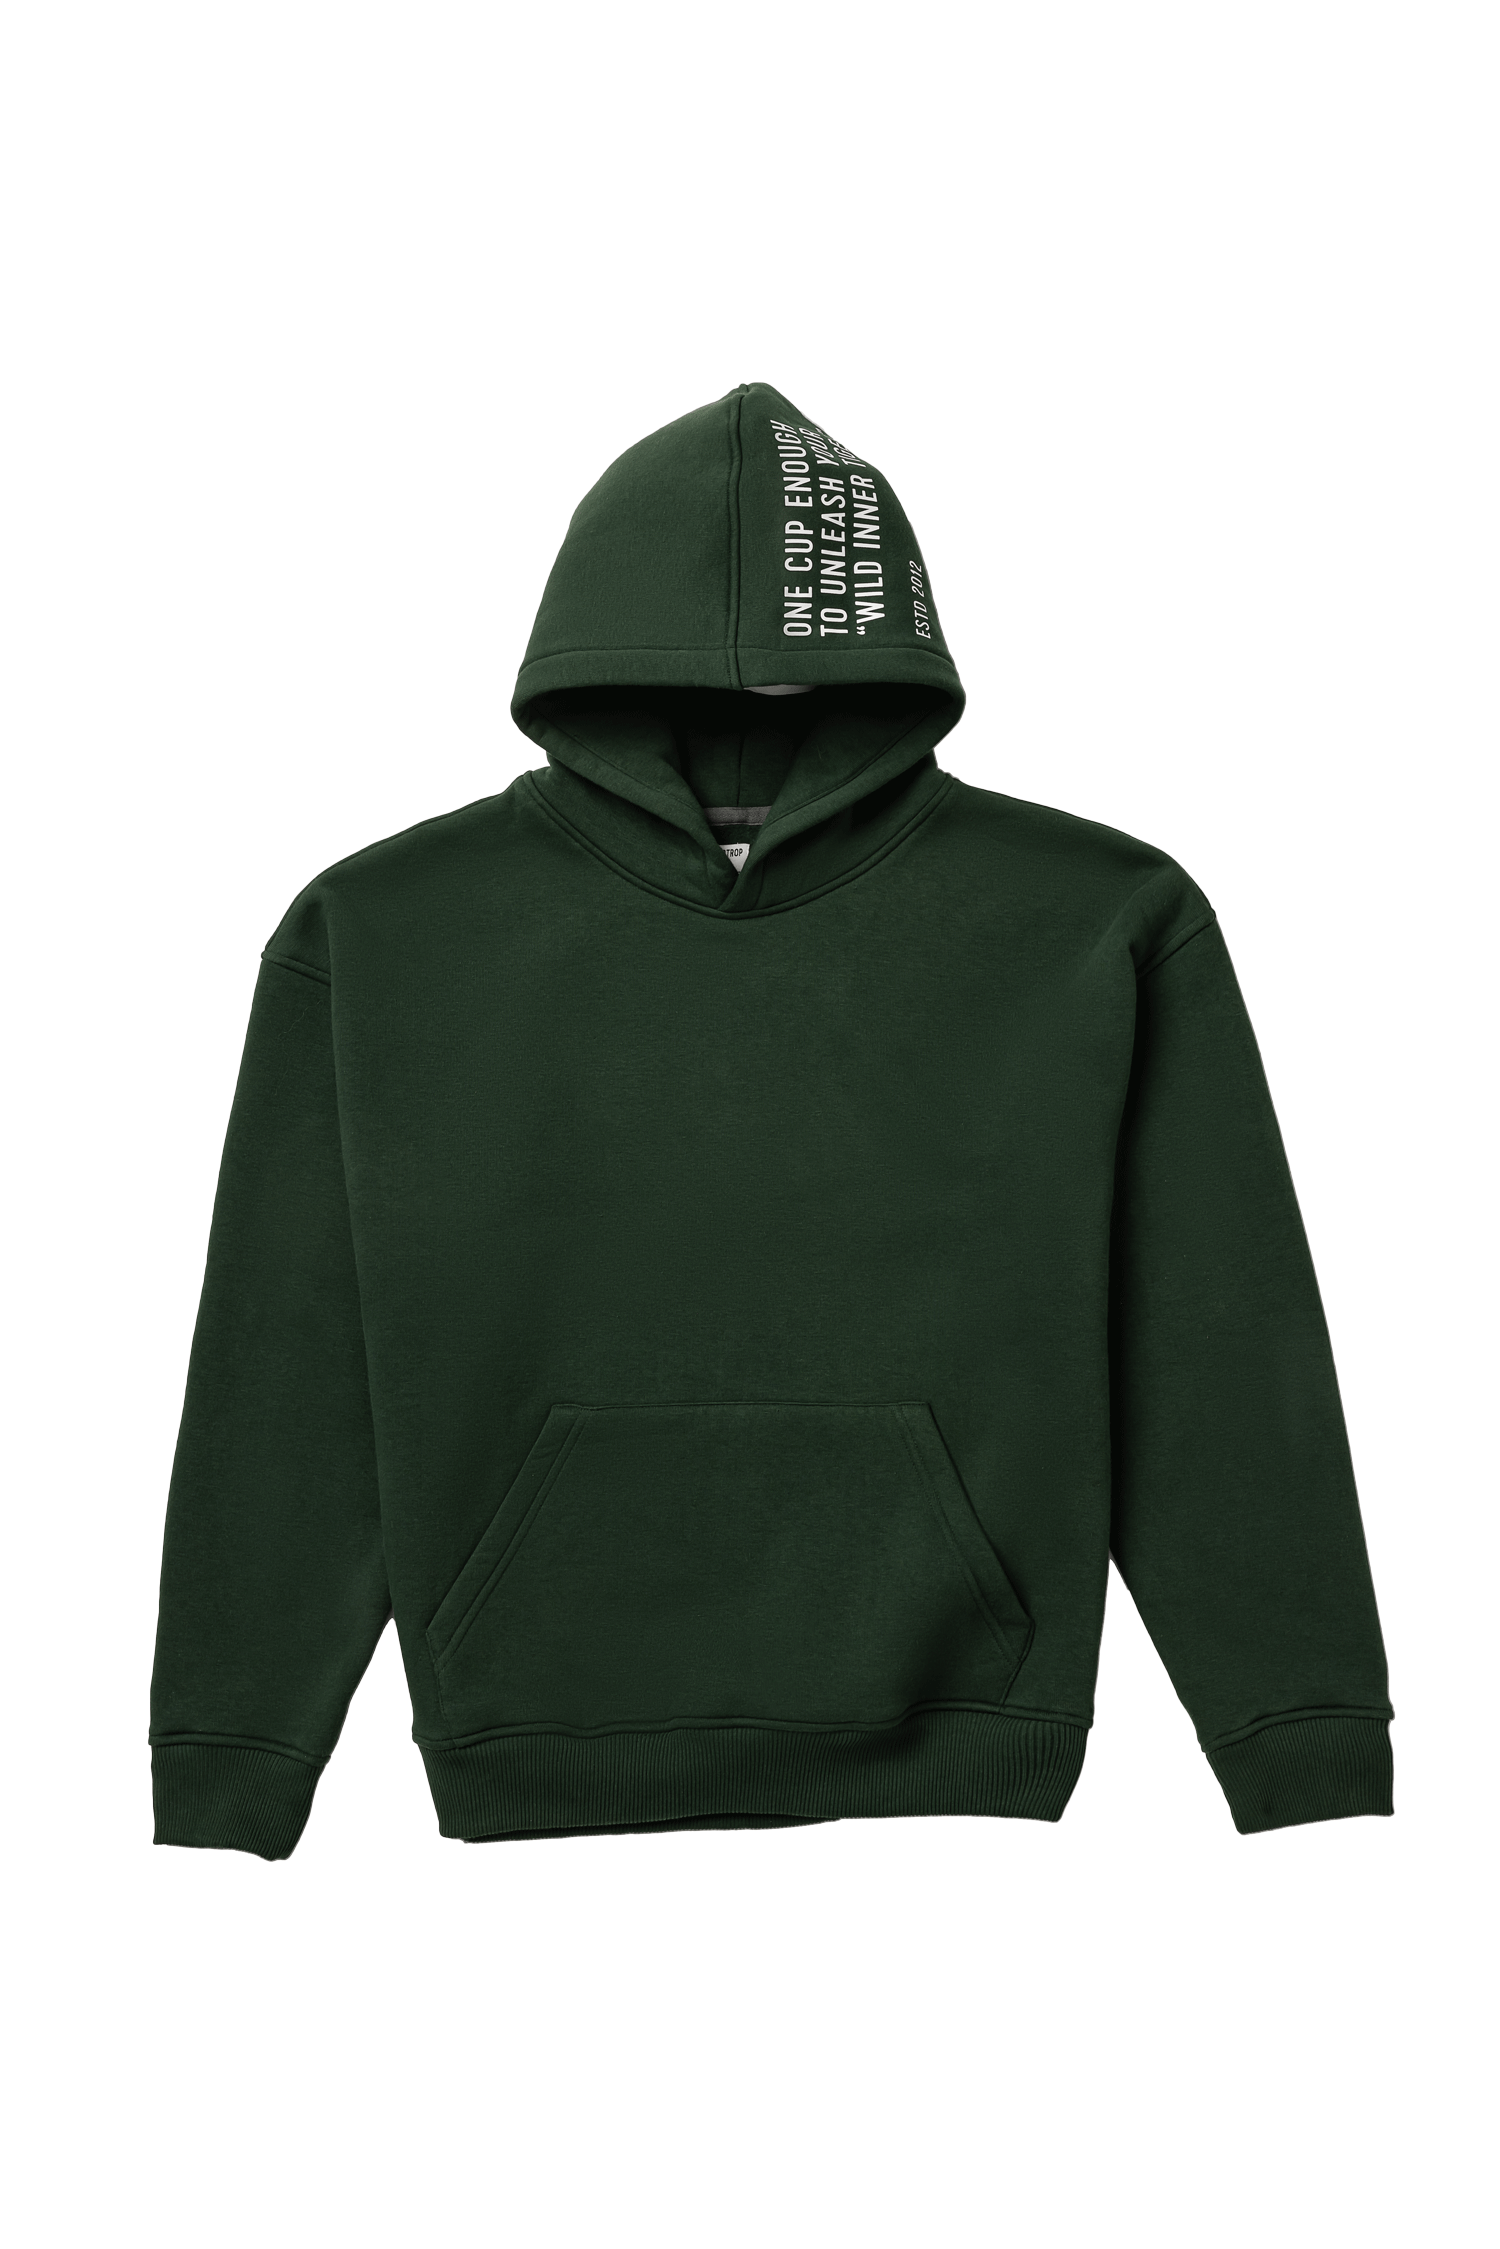 Grounded Collection Oversized Green Hoodie